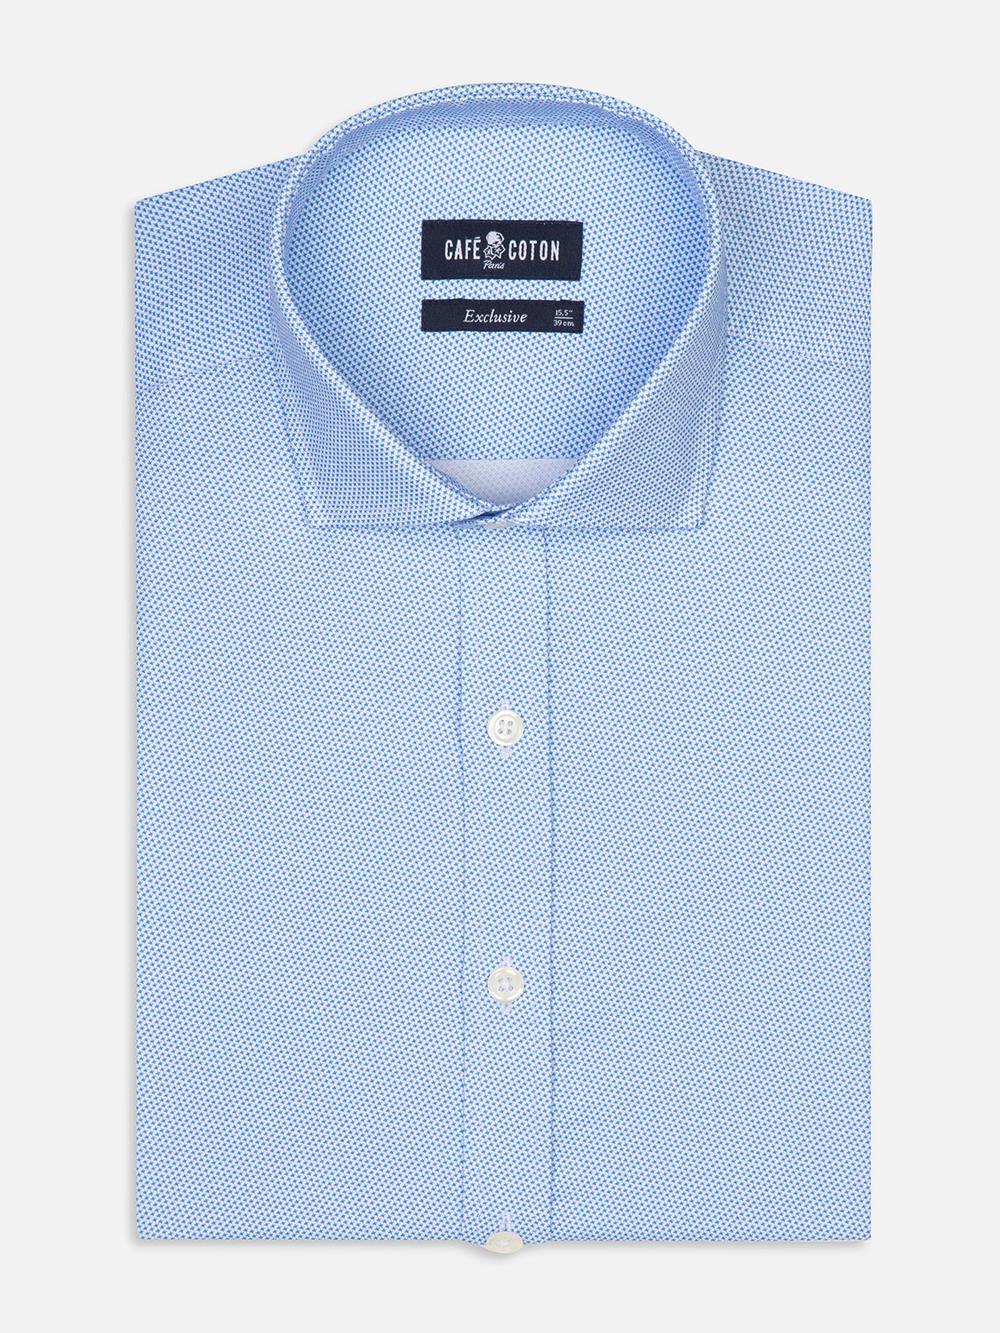 Finn slim fit shirt with sky blue printed pattern - Extra long sleeves